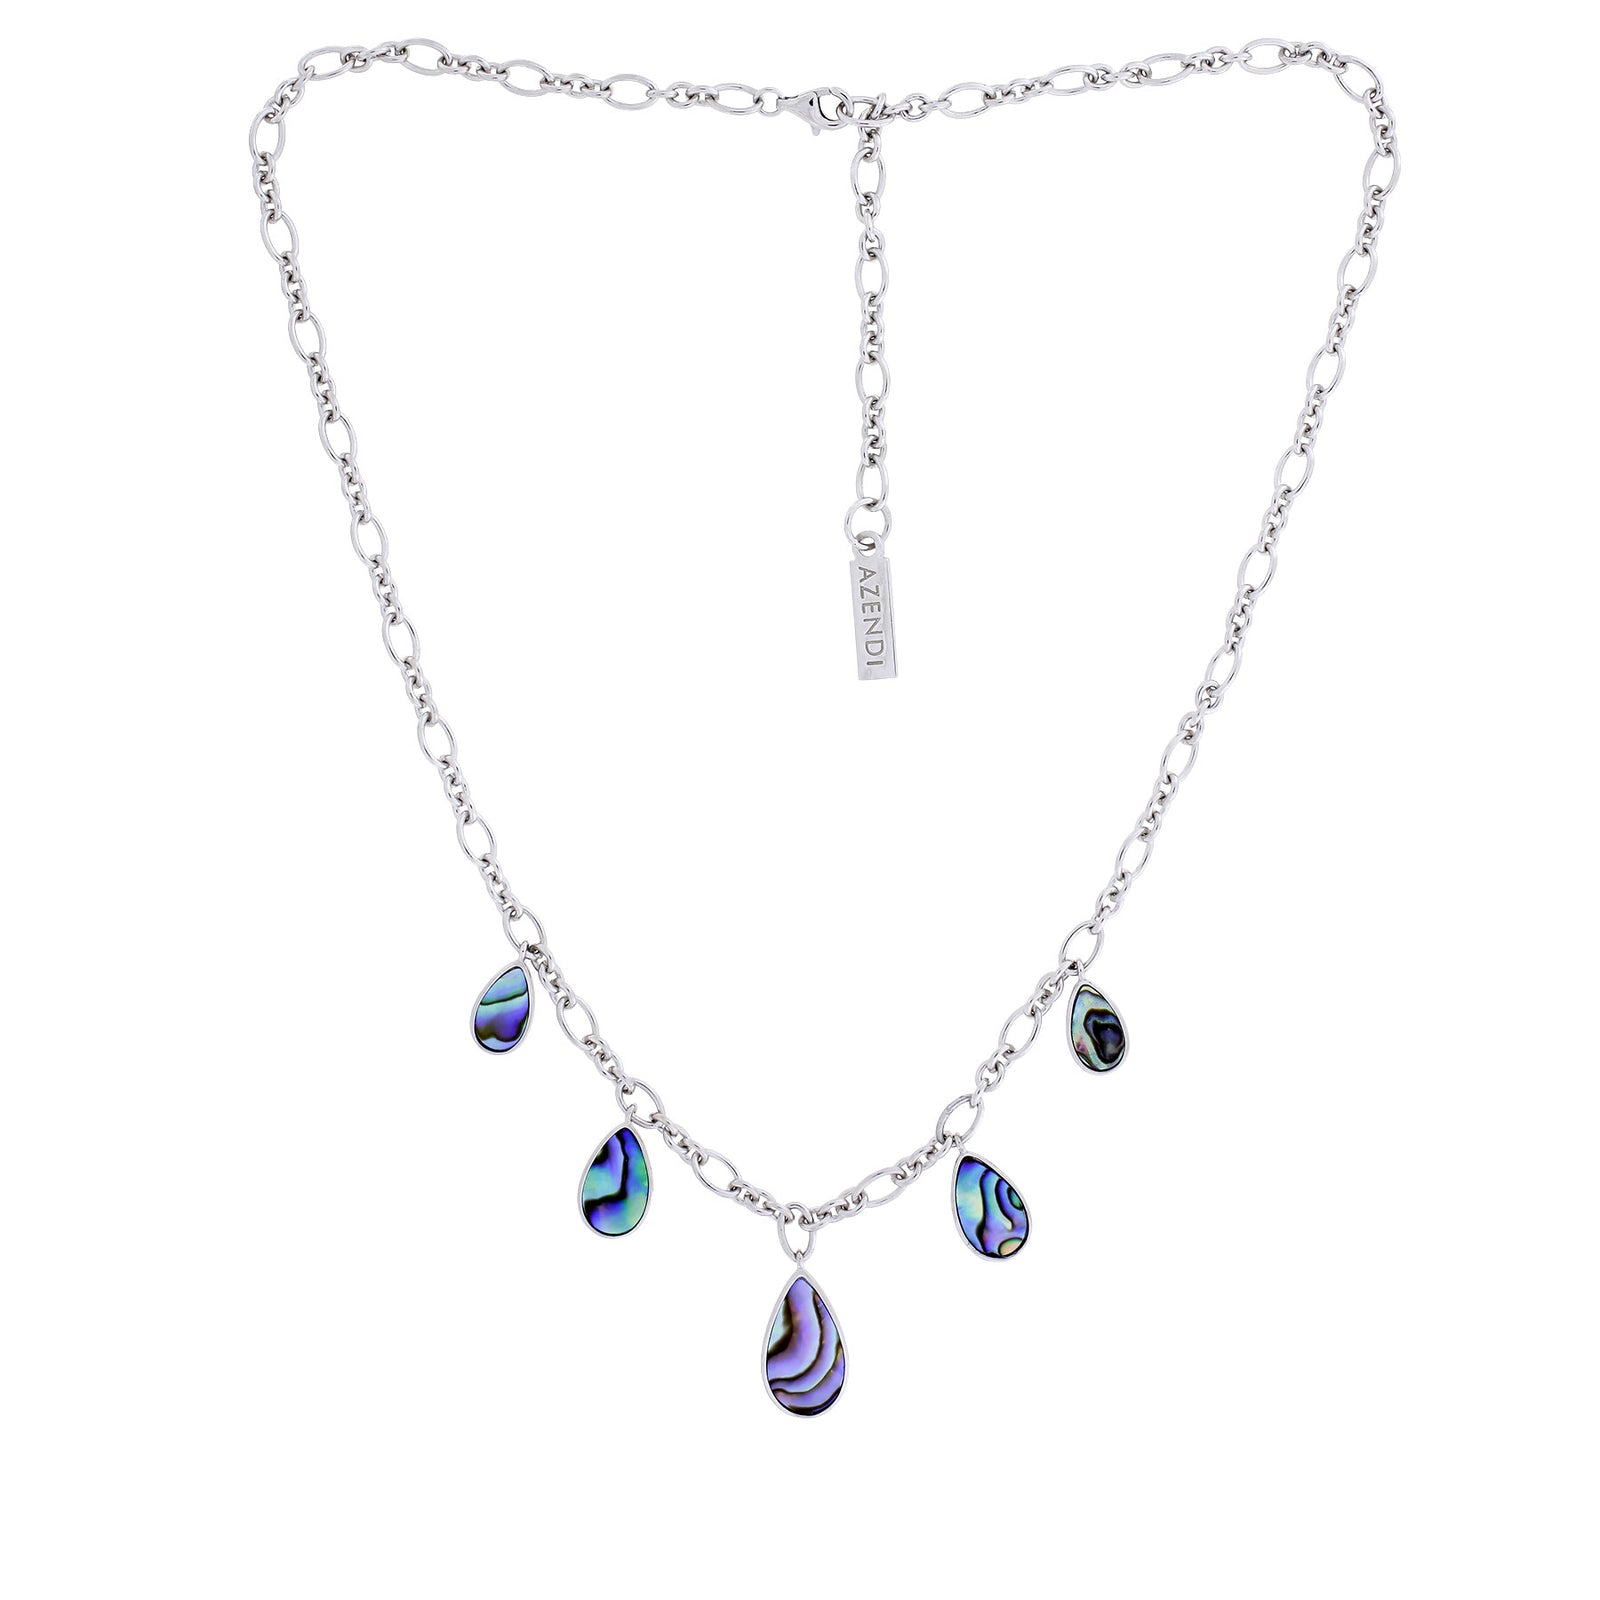 Abalone Teardrops Necklace